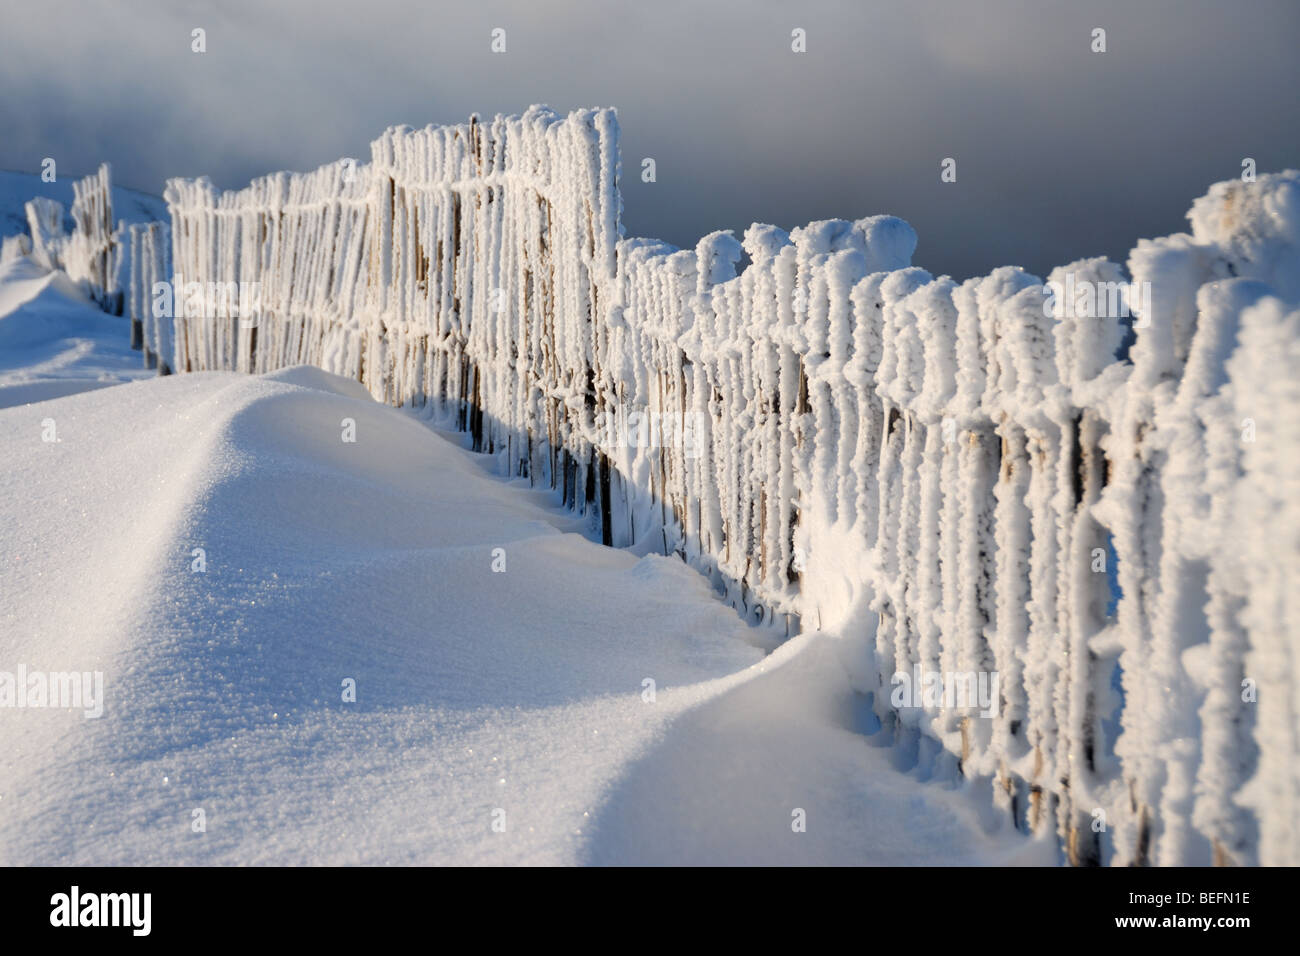 Winter snow and hoarfrost on a fence on Aonach Mor in Scotland Stock Photo